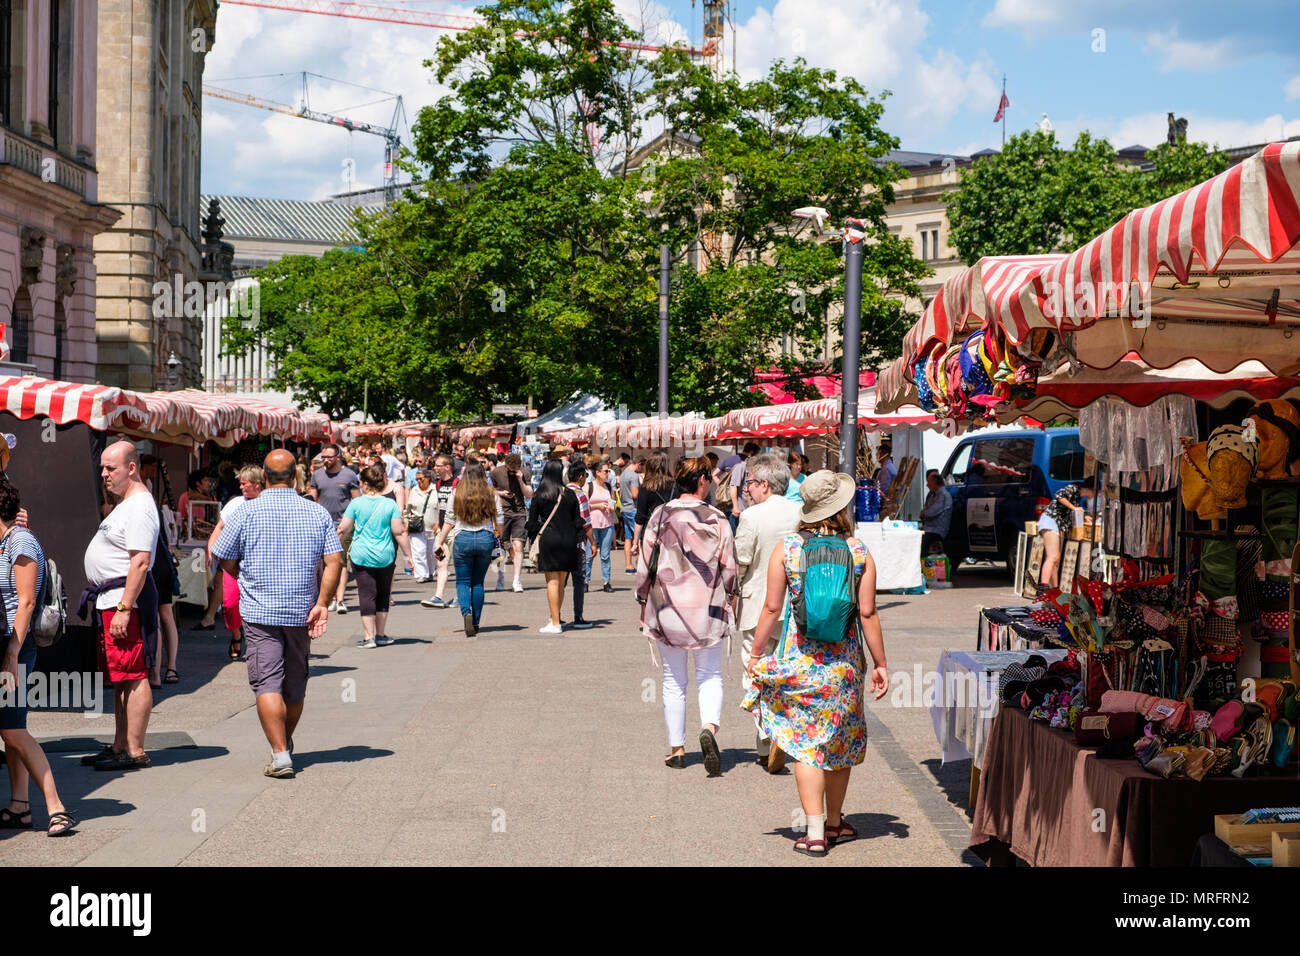 Berlin, Germany - may 2018: People at the art market at Zeughaus near Museum Island on a sunny day in Berlin, Germany Stock Photo